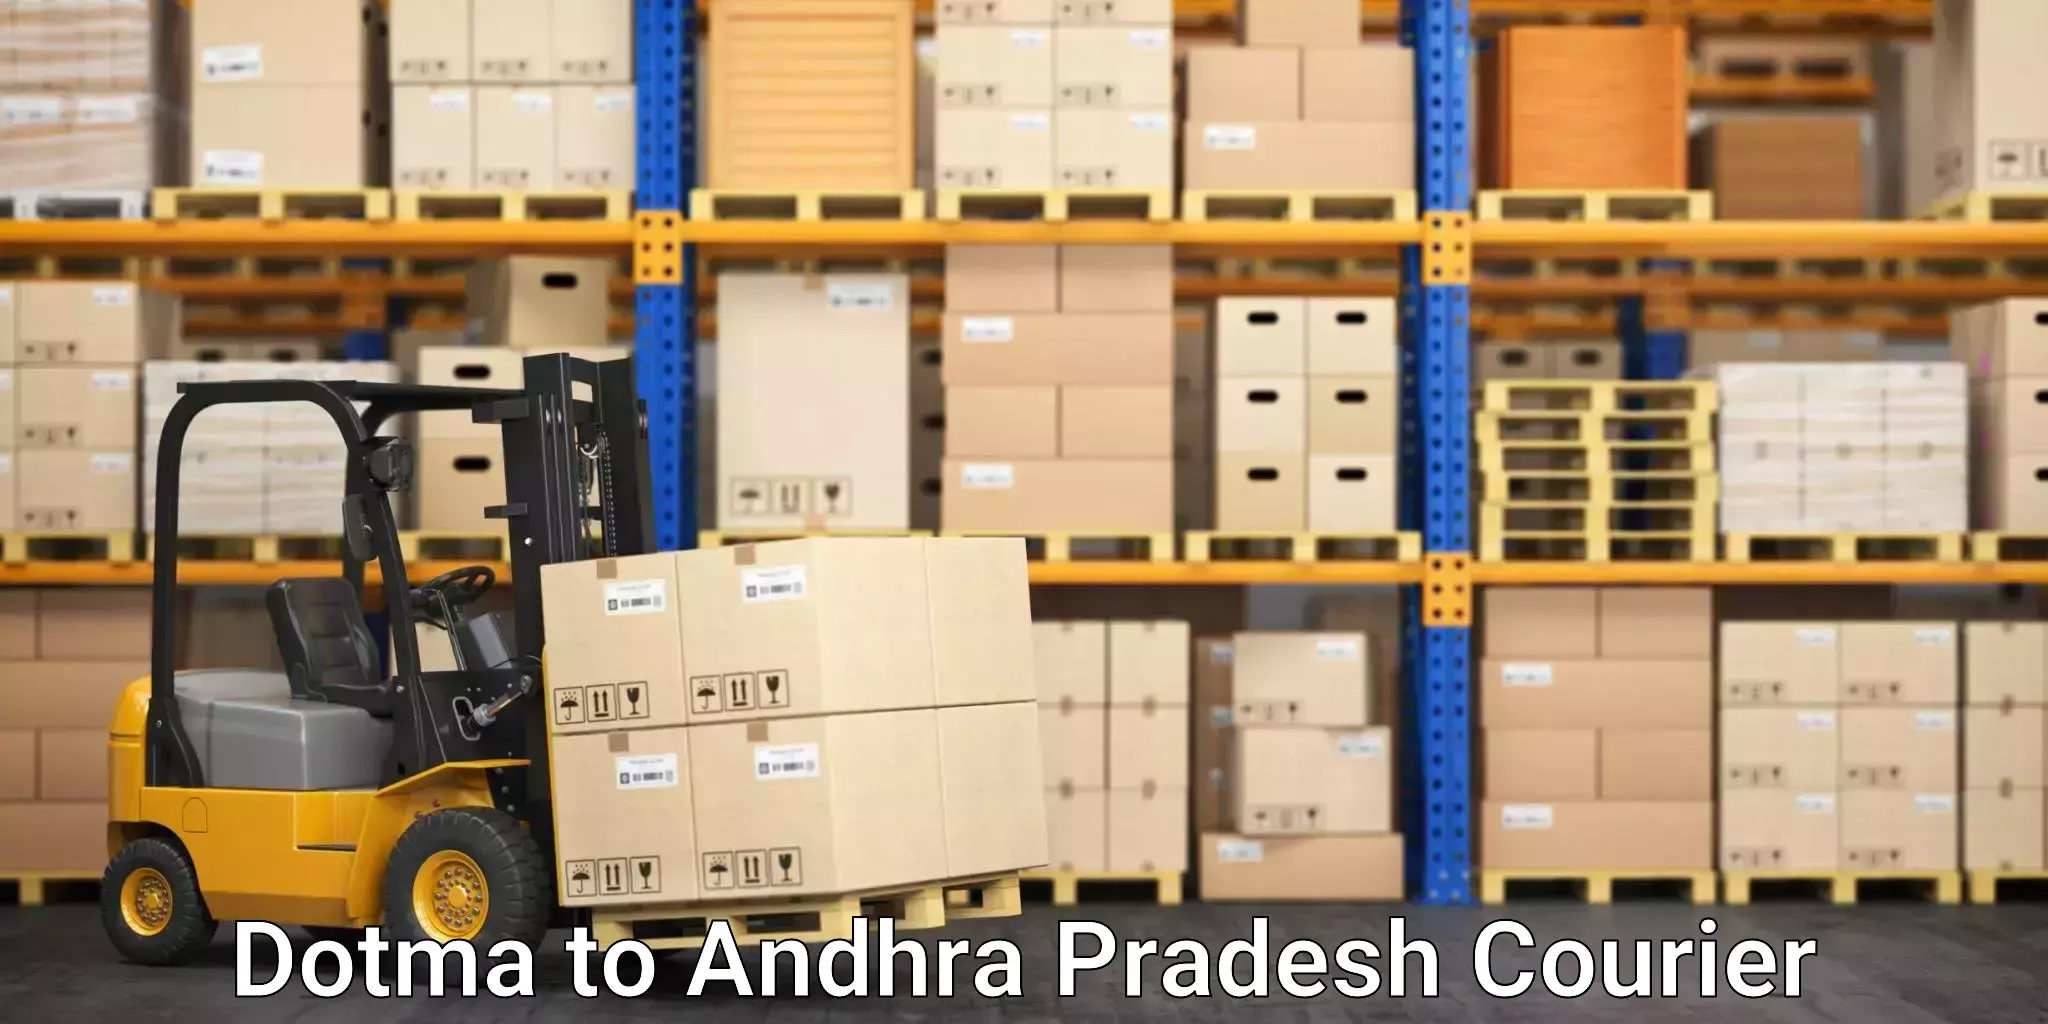 Nationwide shipping services Dotma to Andhra Pradesh